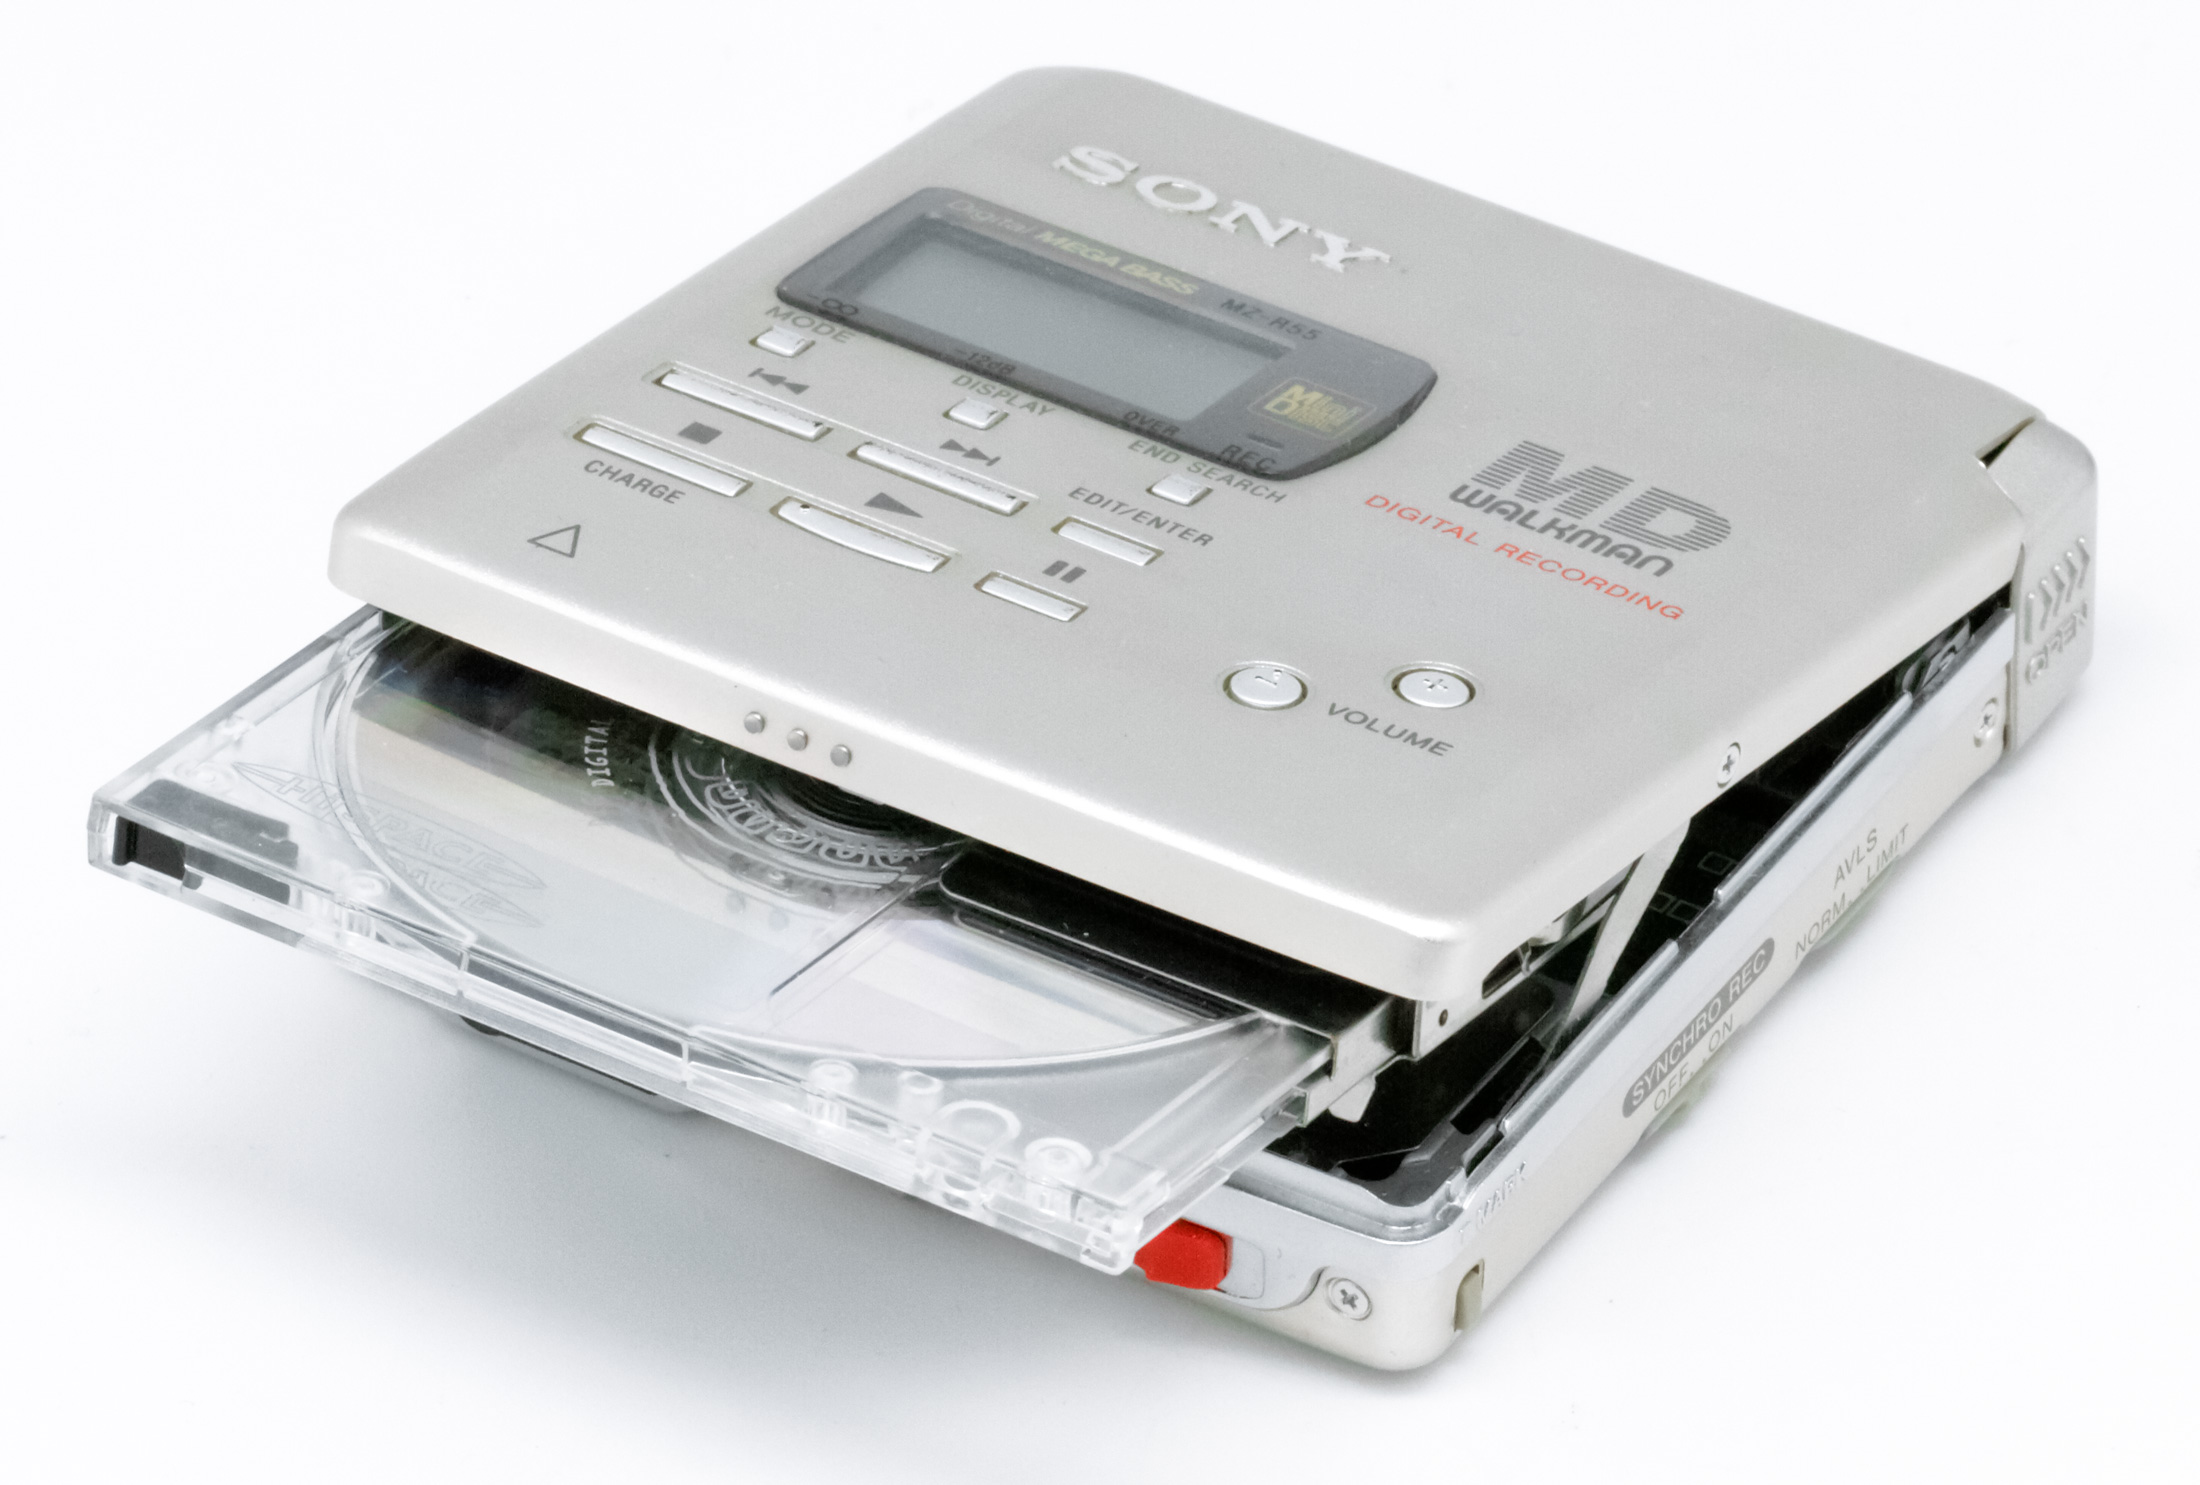 Side-on up-close photograph of the MiniDisc player. Light silver casing, it is open, with a transparent see through MiniDisc just put halfway inside.